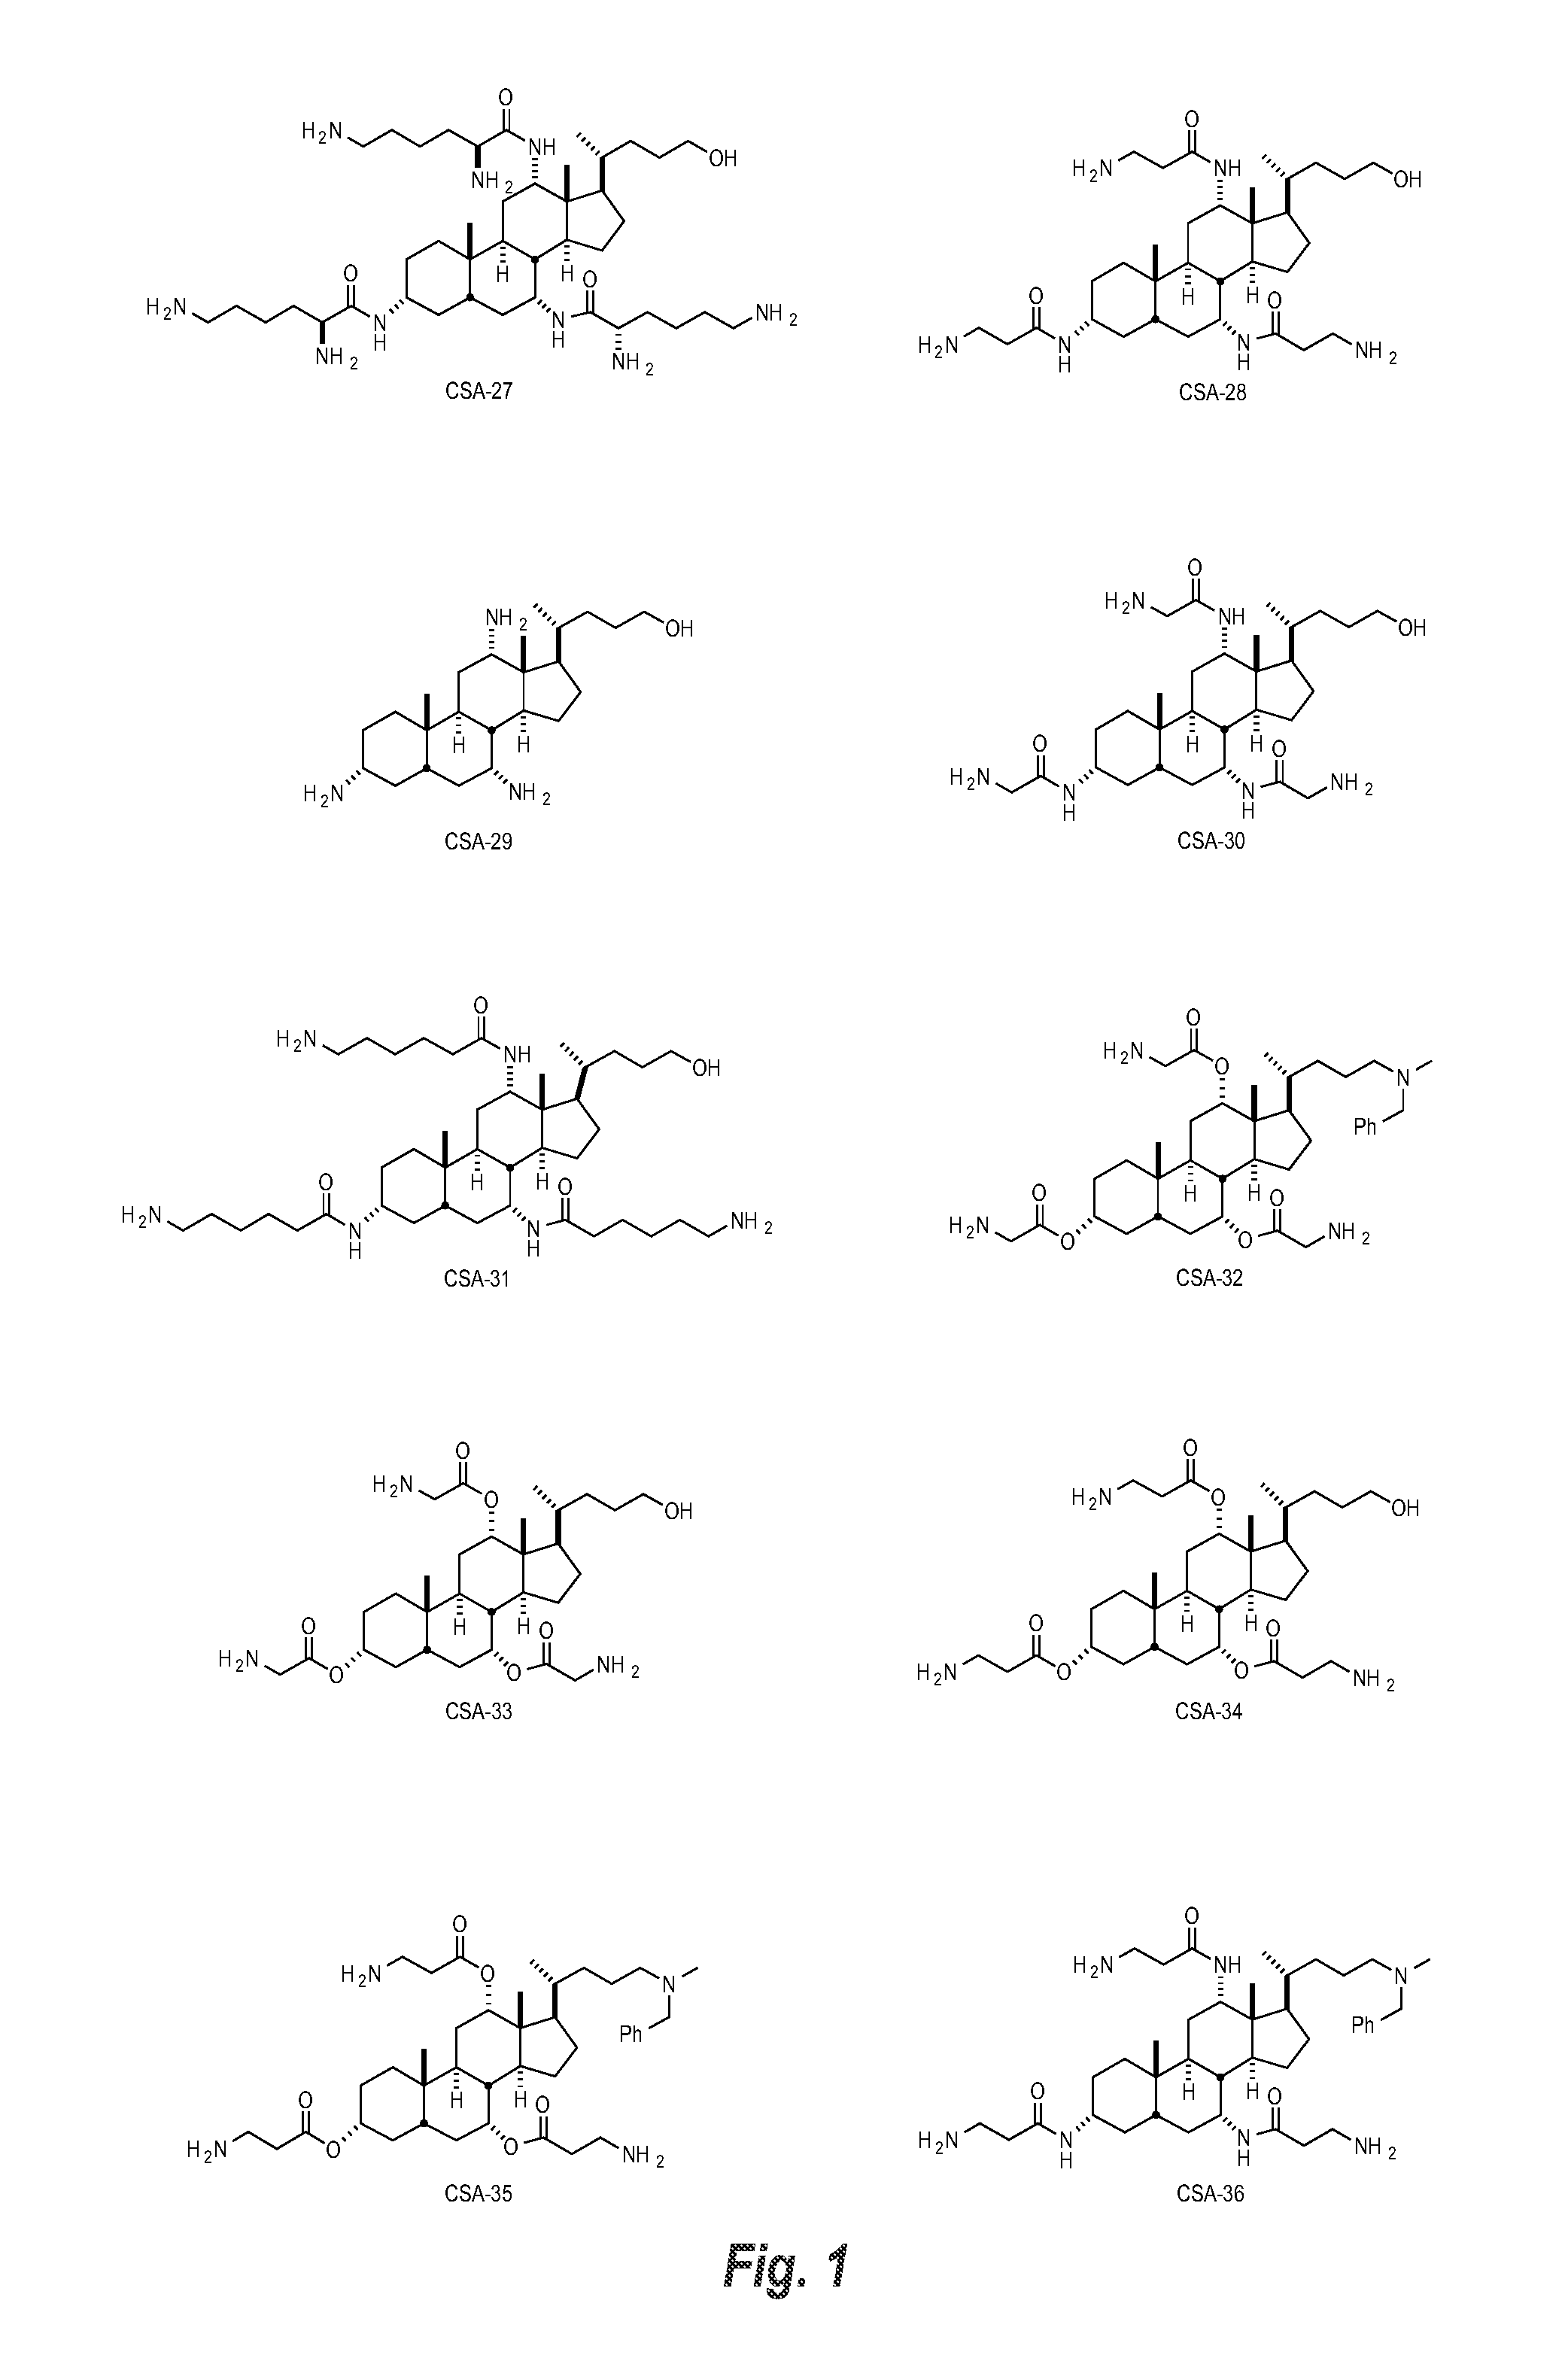 Storage-stable, anti-microbial compositions including ceragenin compounds and methods of use